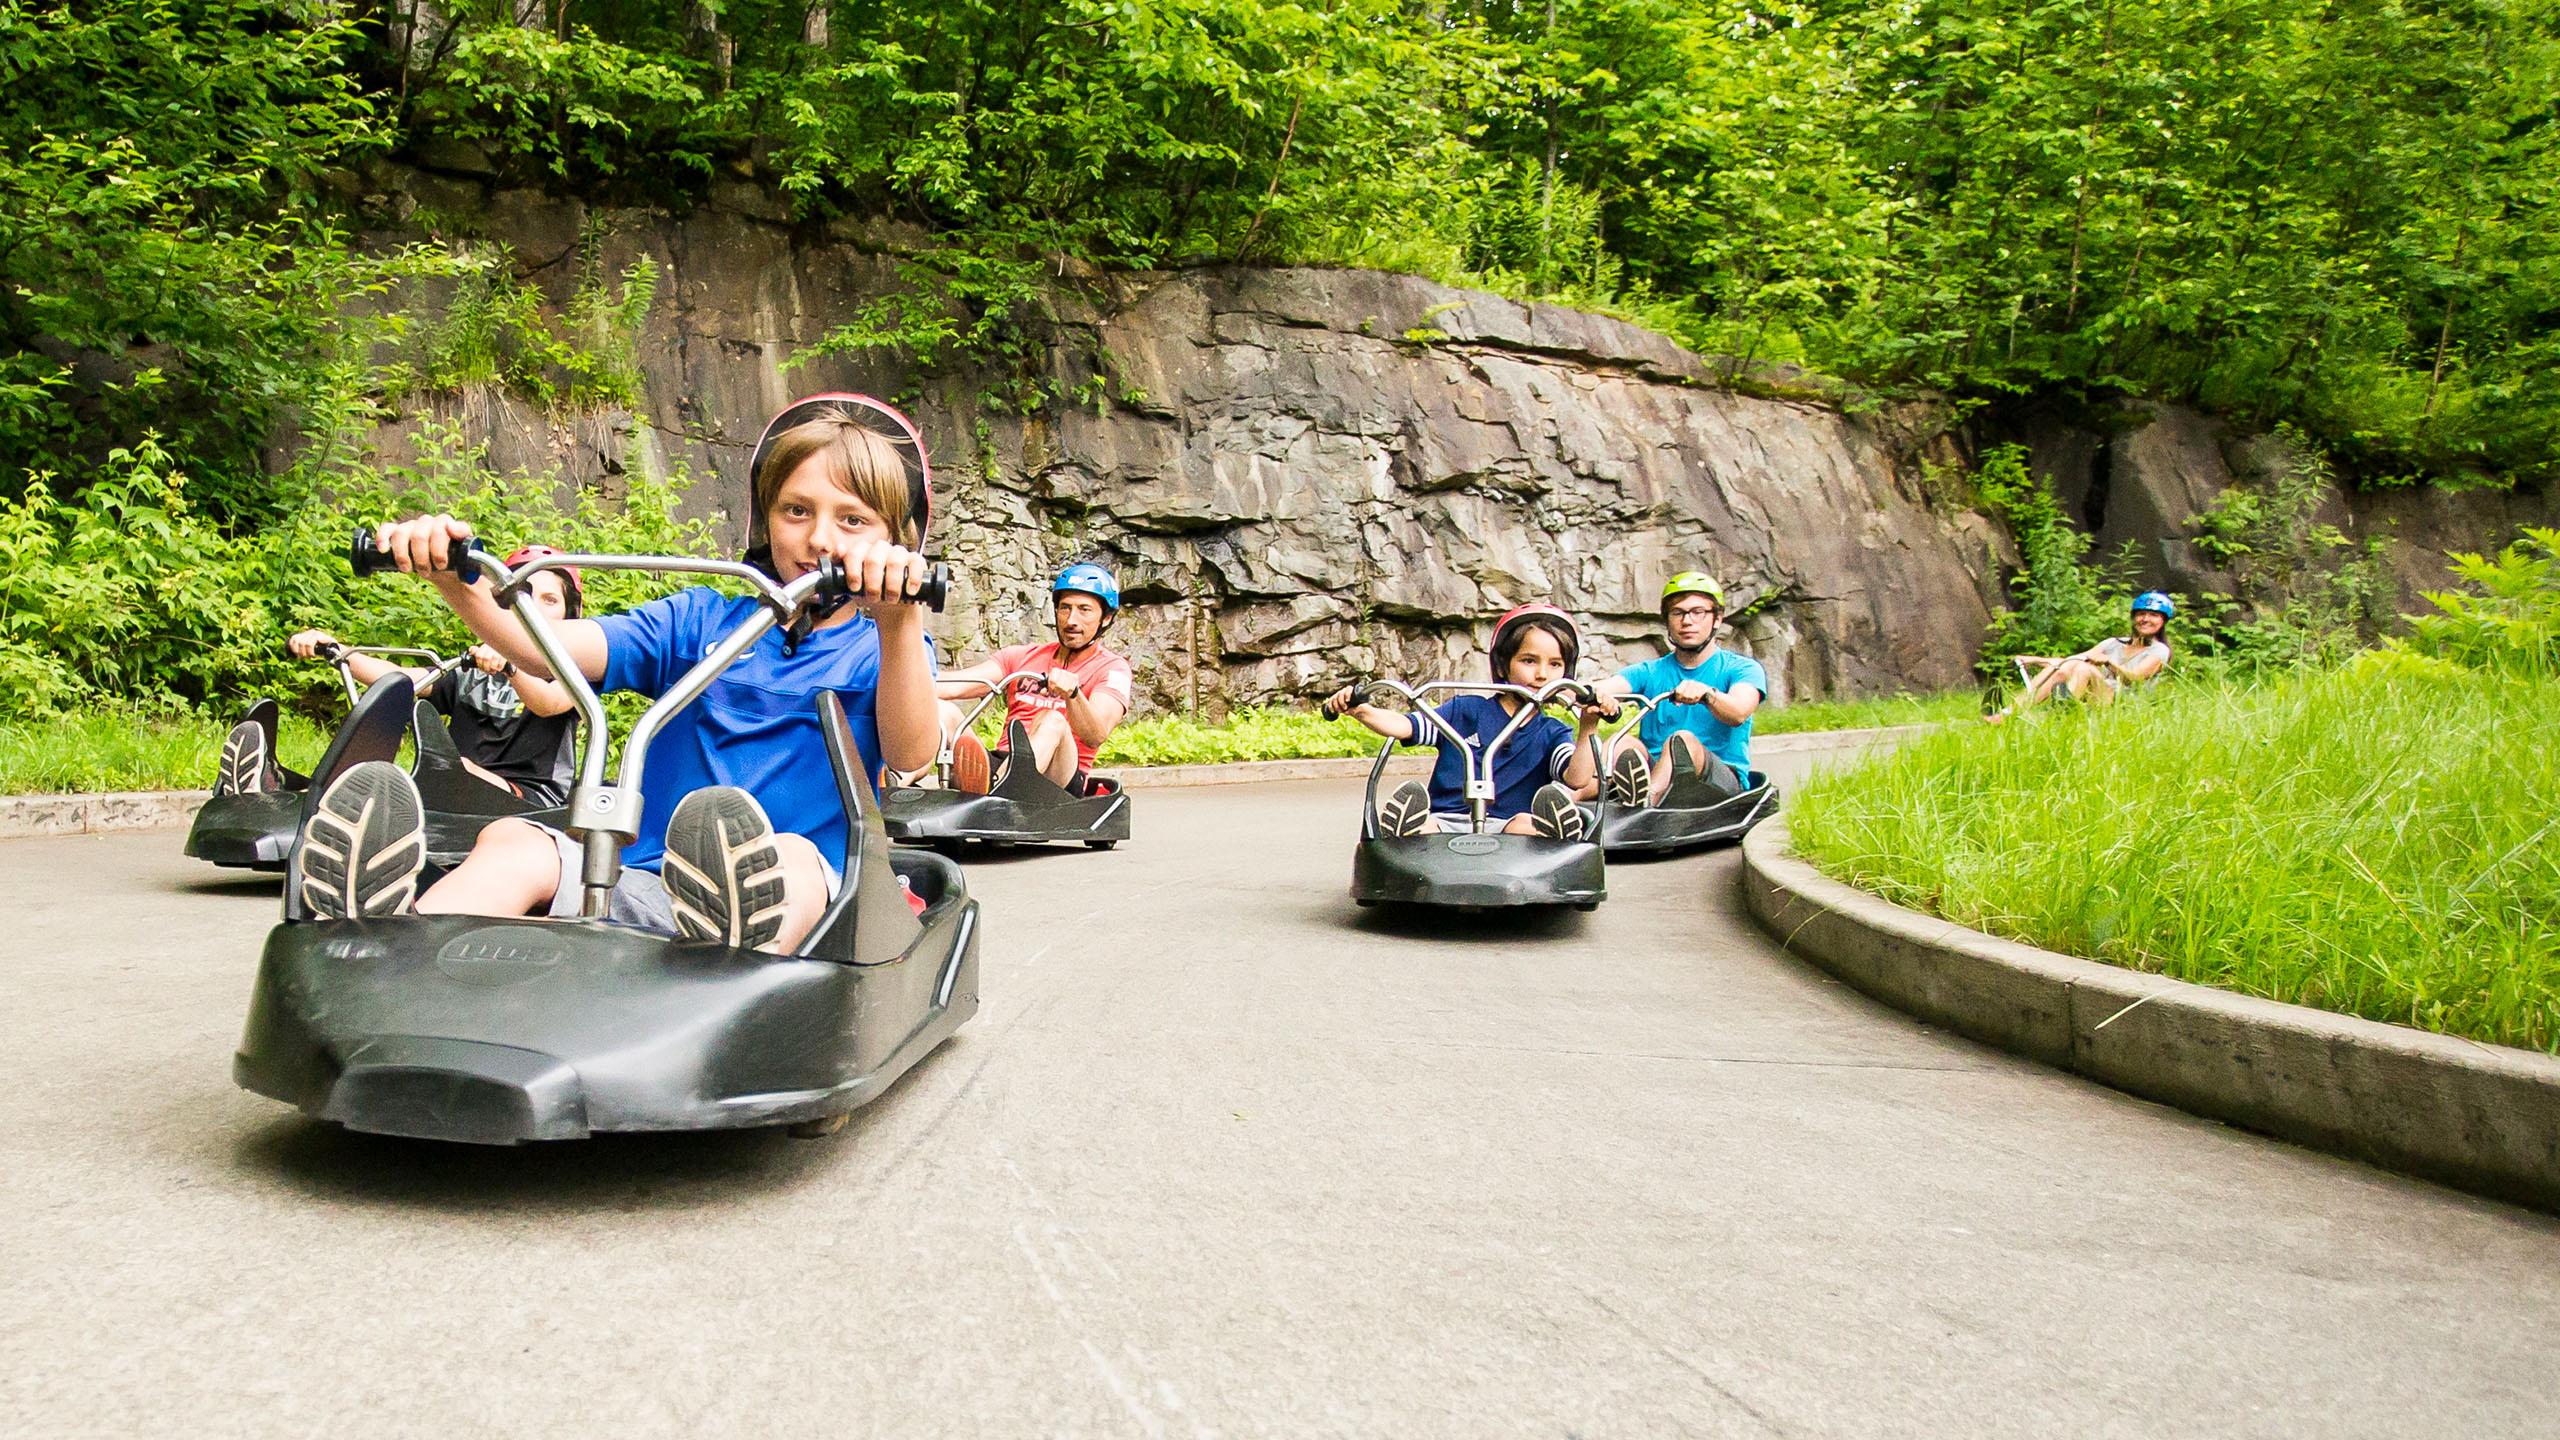 A group of kids and adults race round a corner on the Skyline Luge Mont Tremblant track.